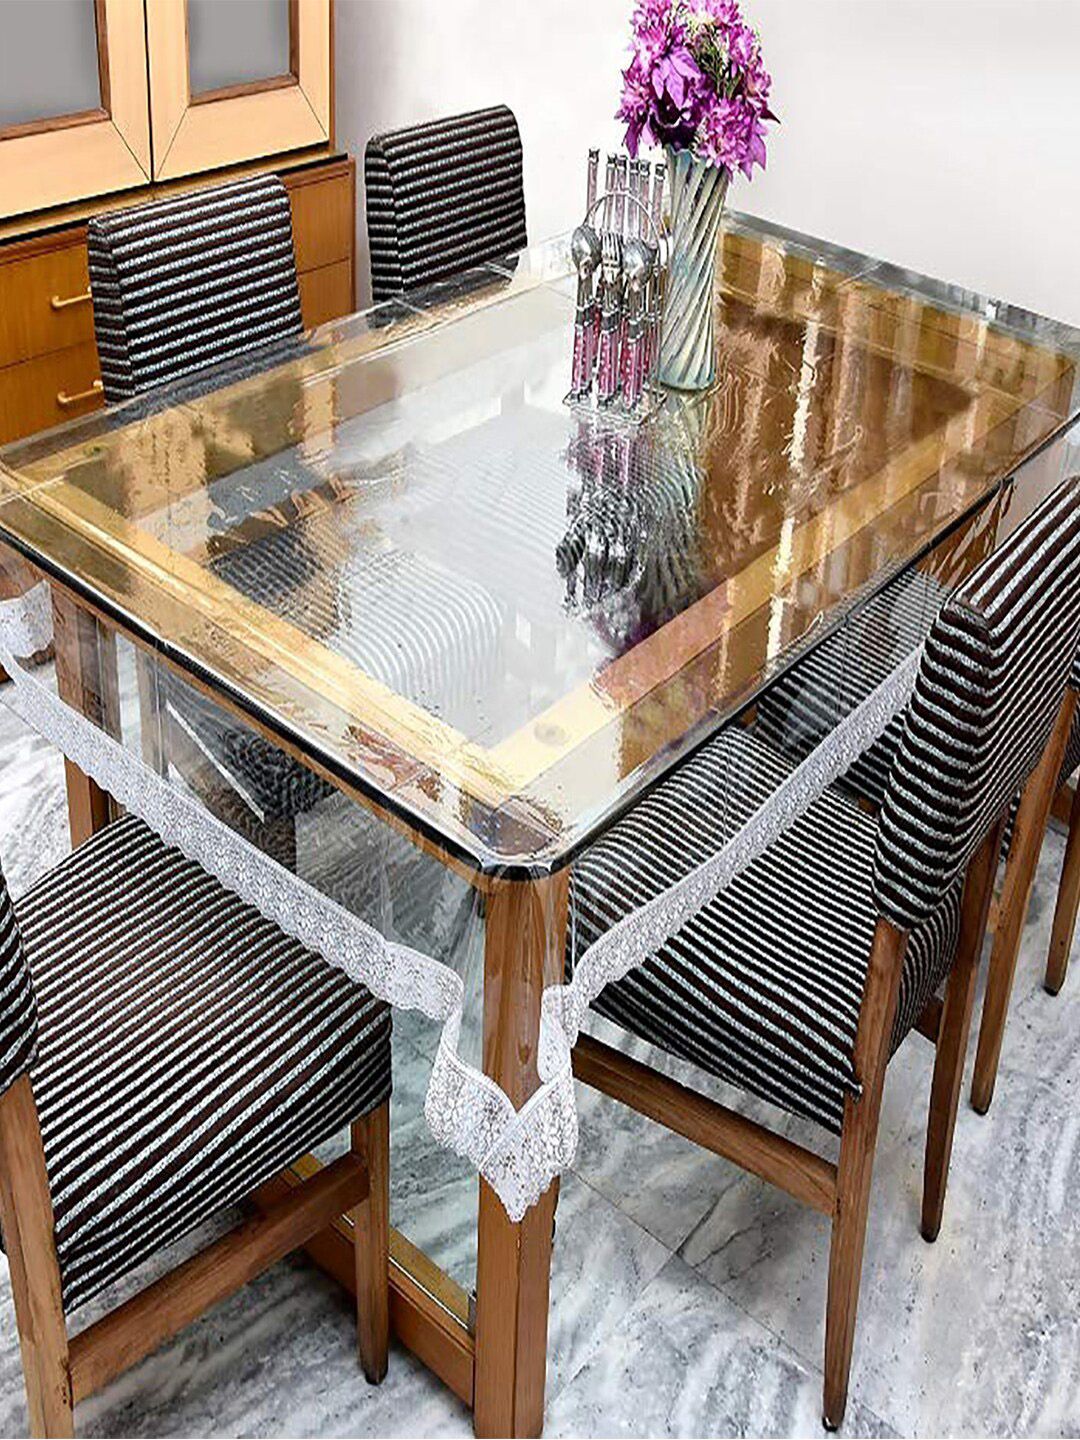 Kuber Industries Transparent 4 Seater Rectangular Table Covers Price in India